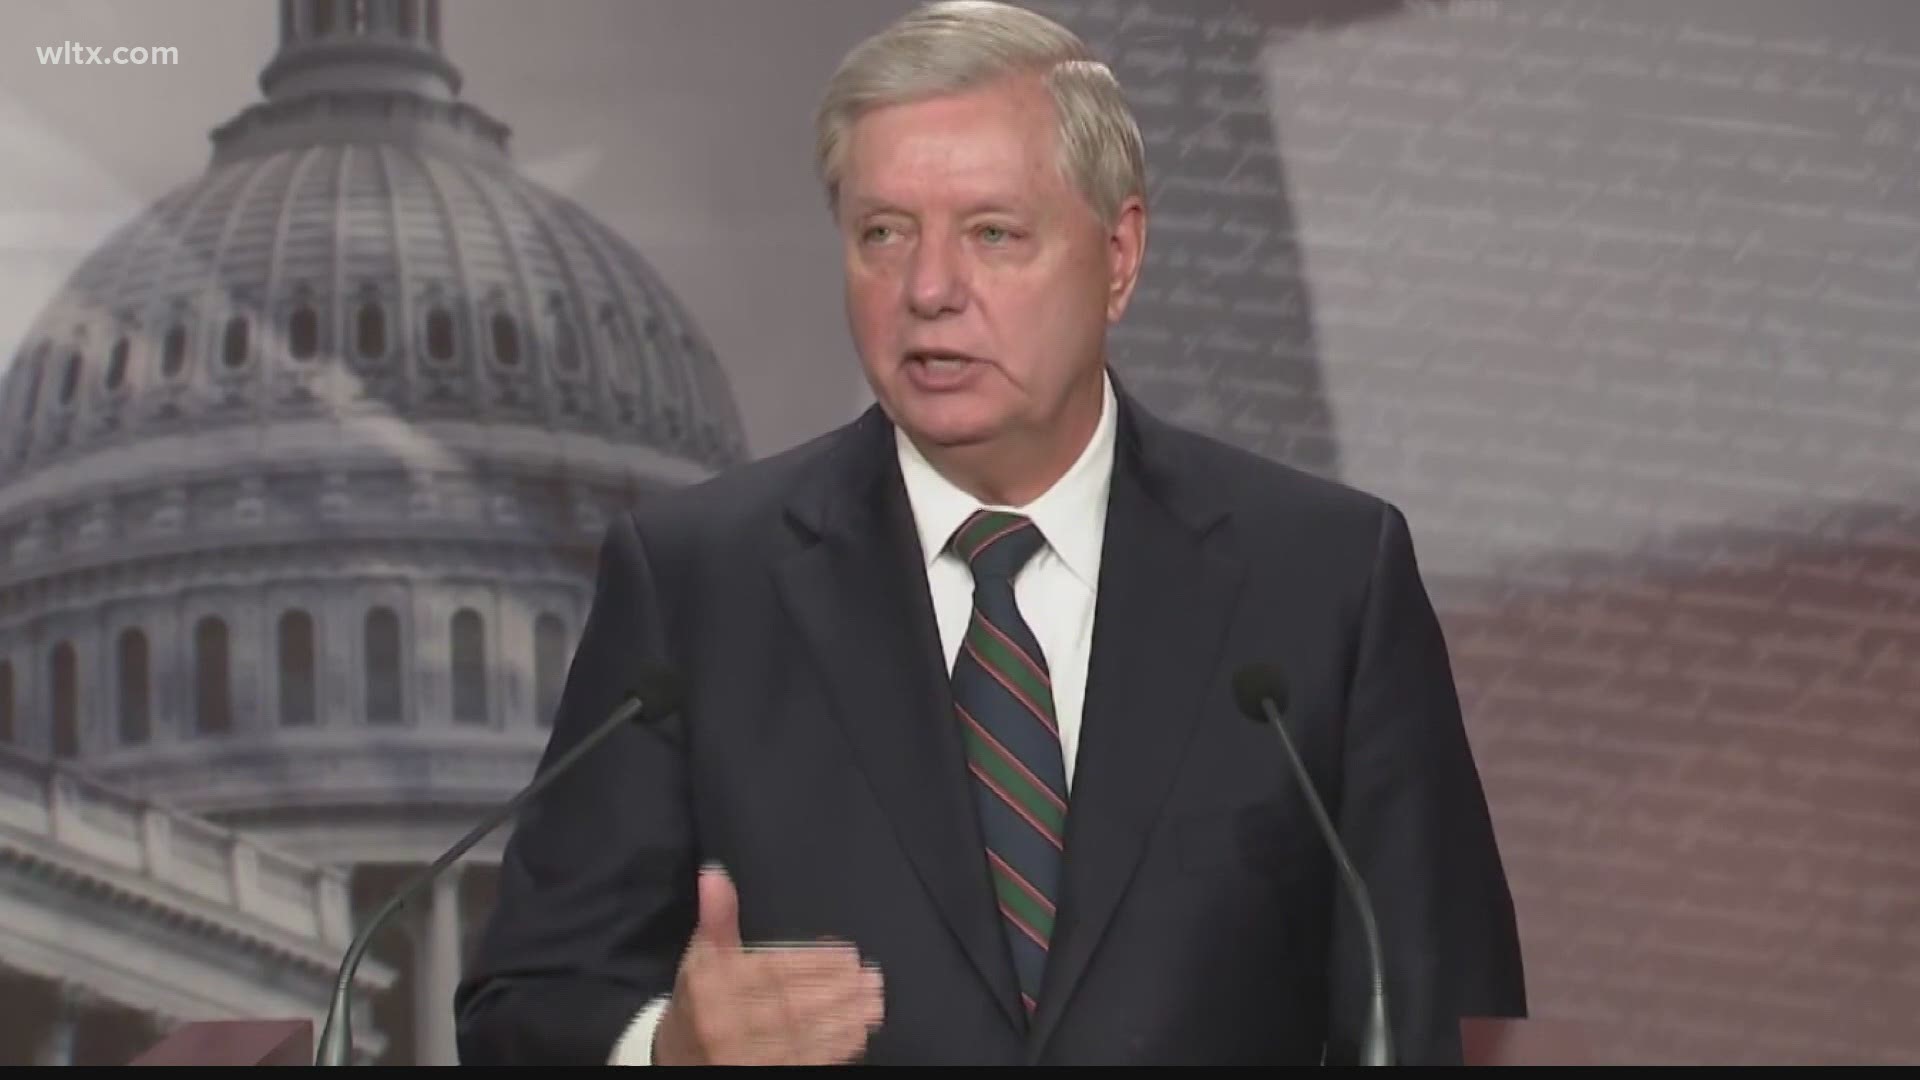 On Friday Senator Lindsey Graham answered questions during a zoom press conference.